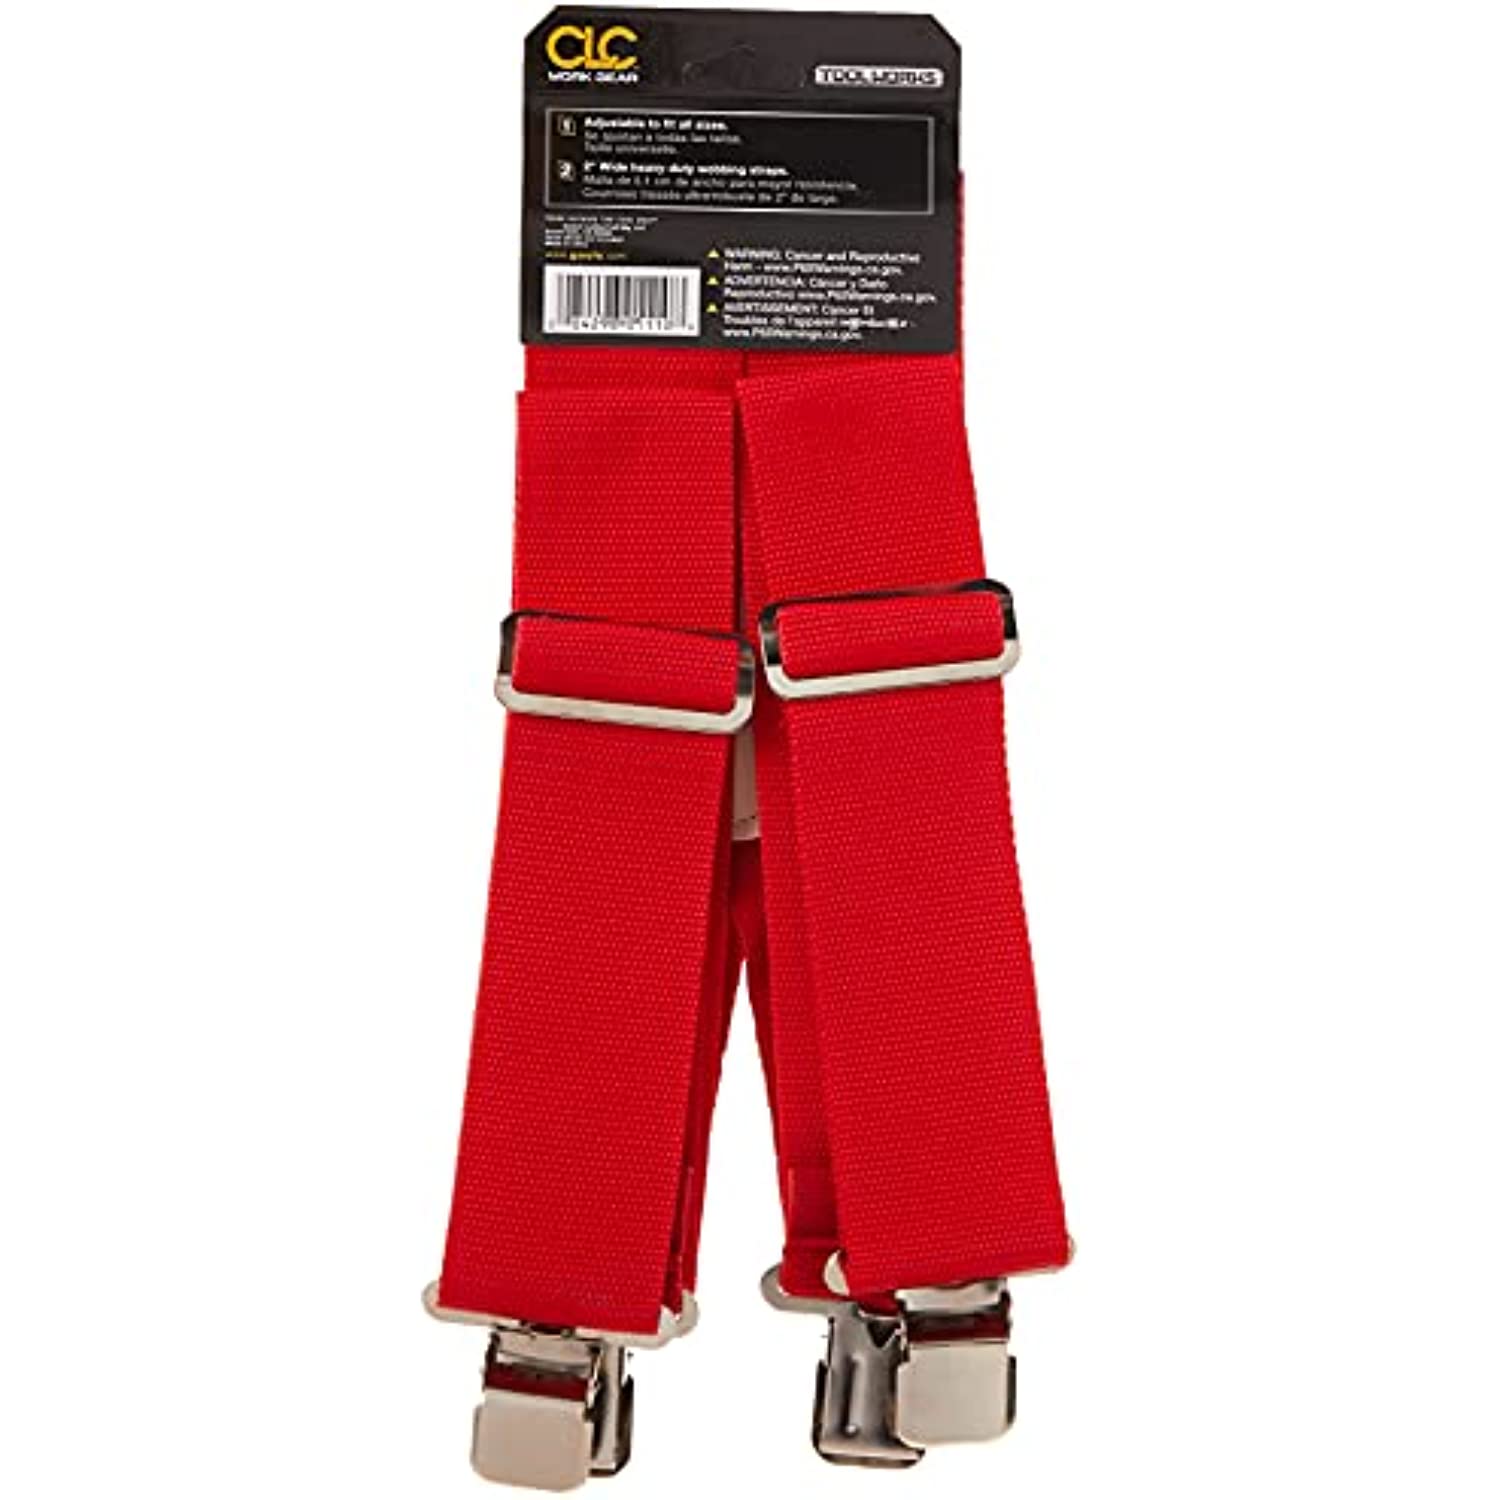 110RED 2 Wide Red Work Suspenders - image 5 of 5